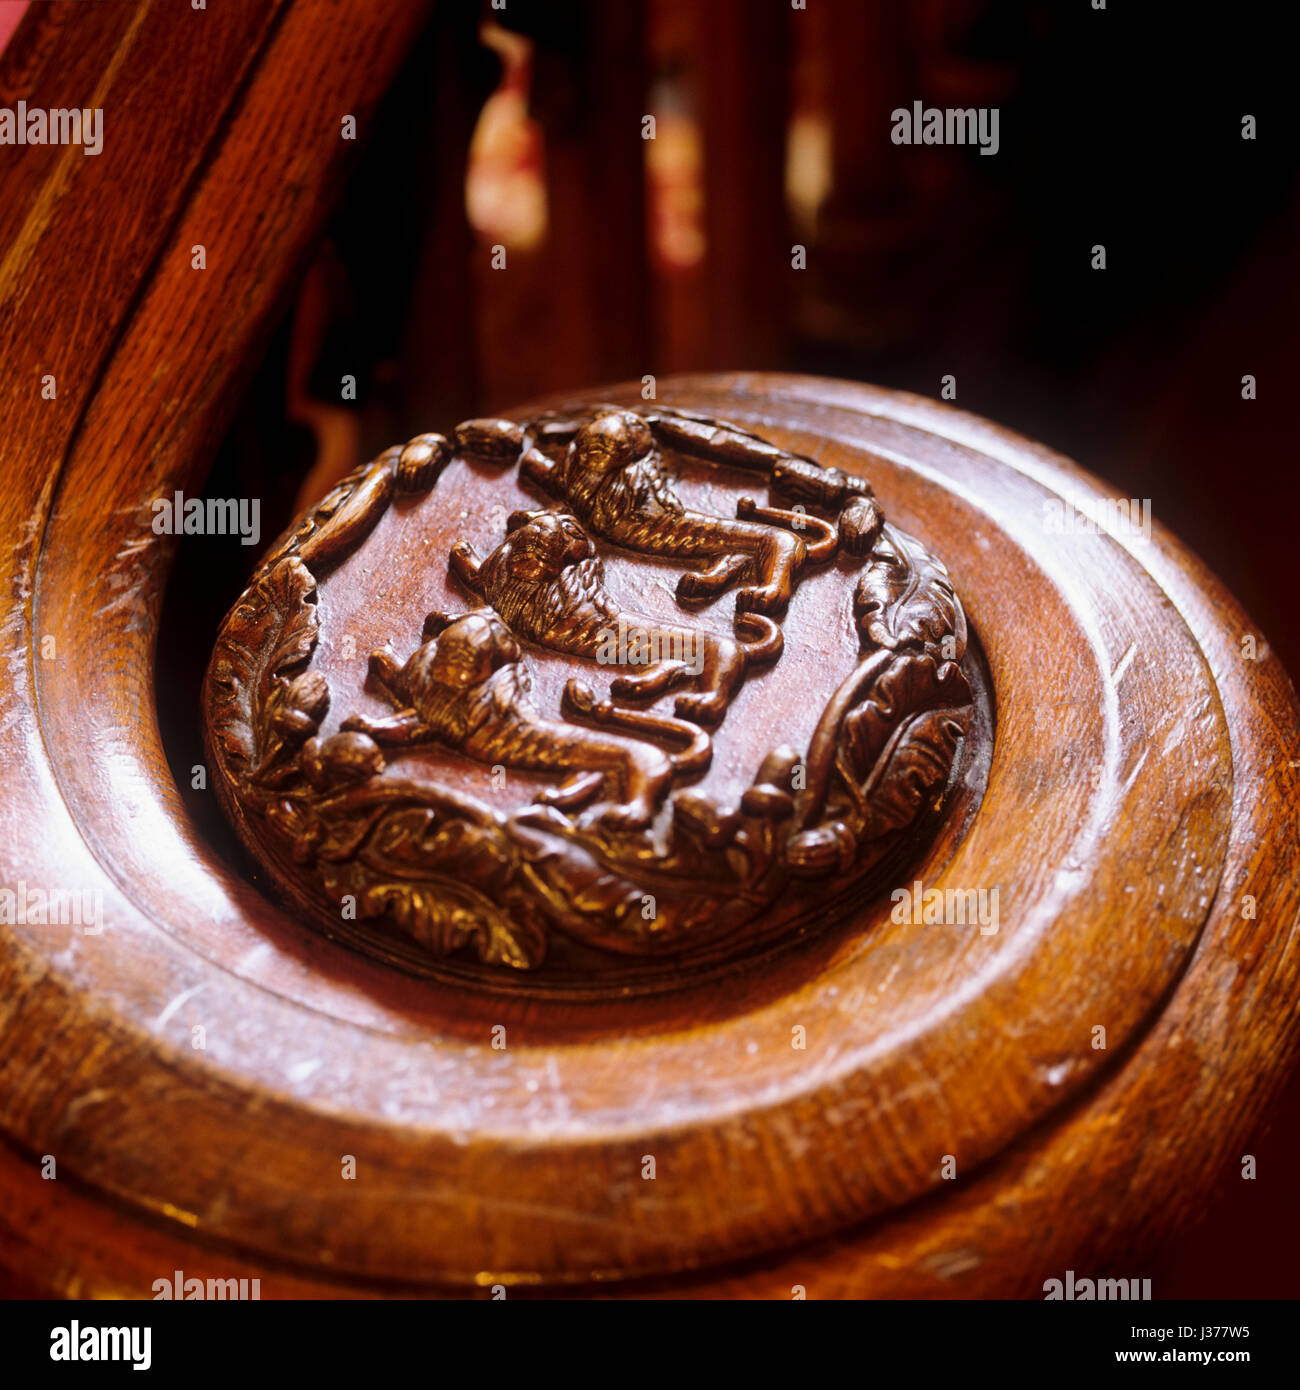 End of ornate wooden railing. Stock Photo